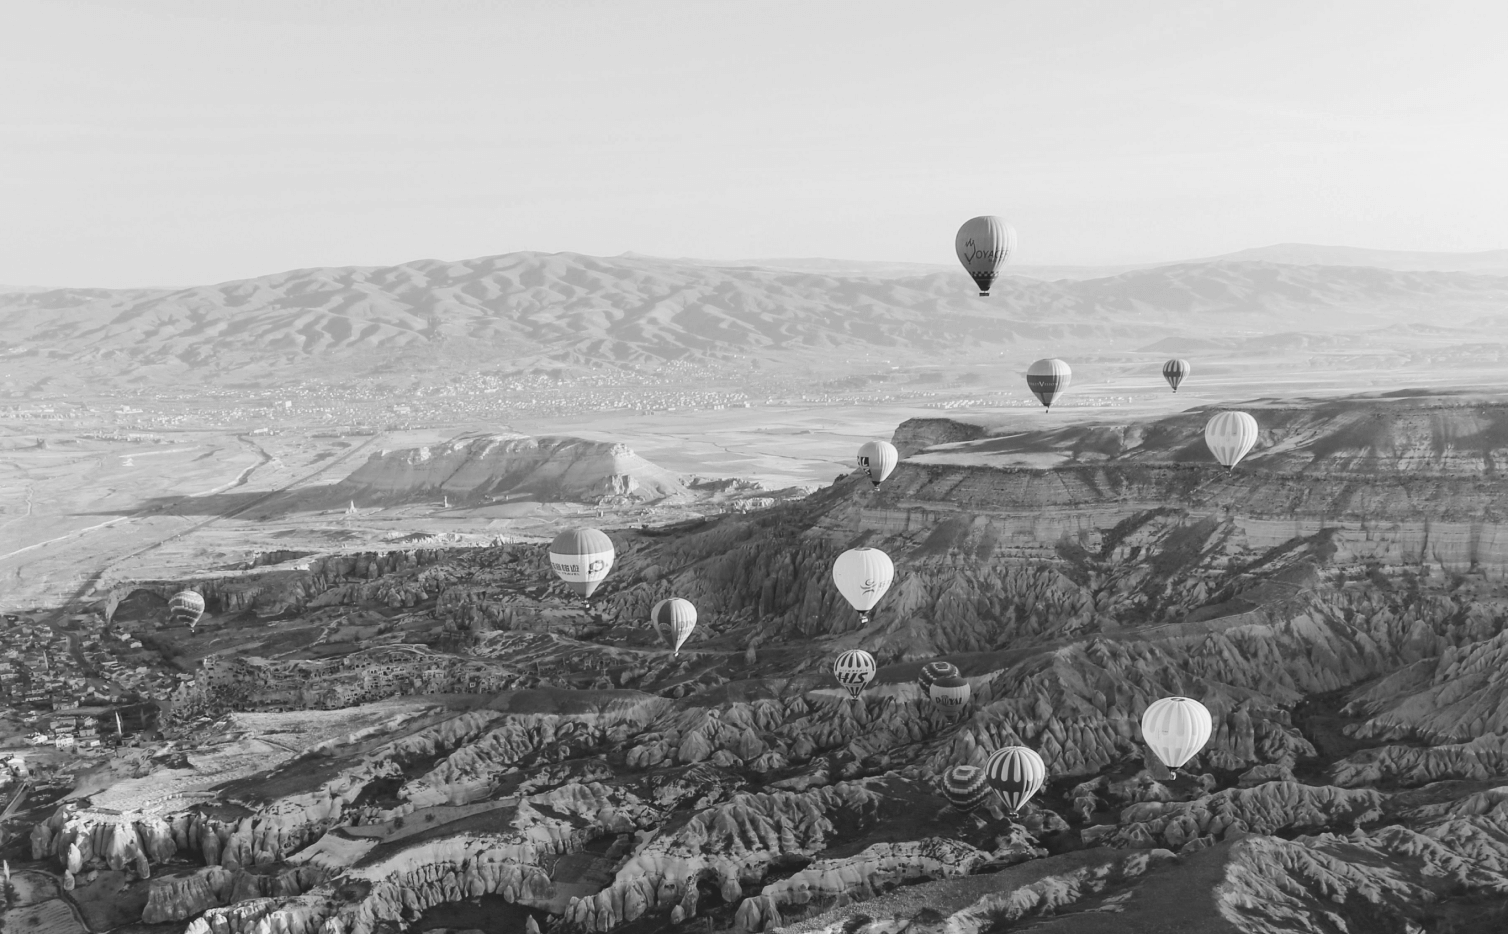 This image of launched hot air balloons highlights this post's topic: New TLDs.